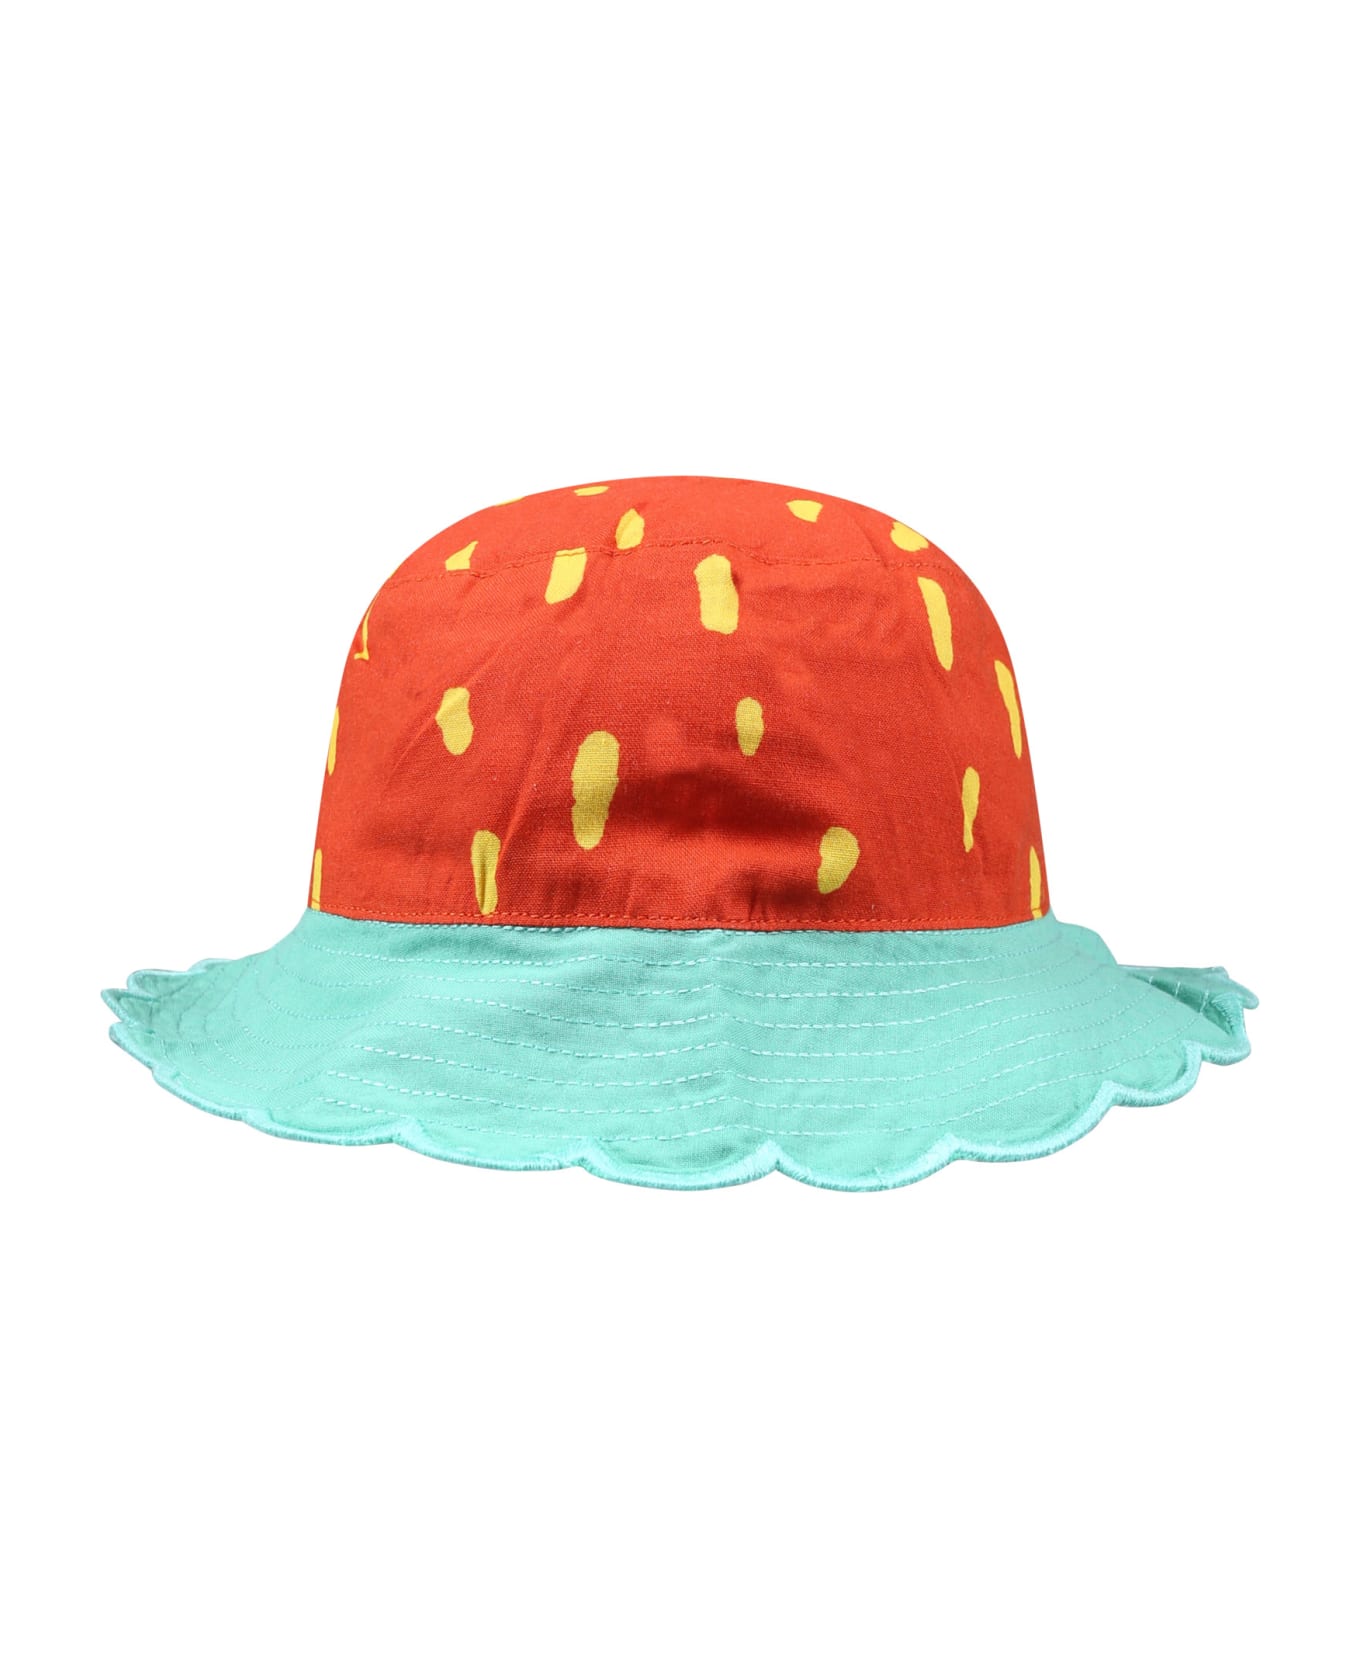 Stella McCartney Kids Red Cloche For Baby Girl With All-over Yellow Print - Red